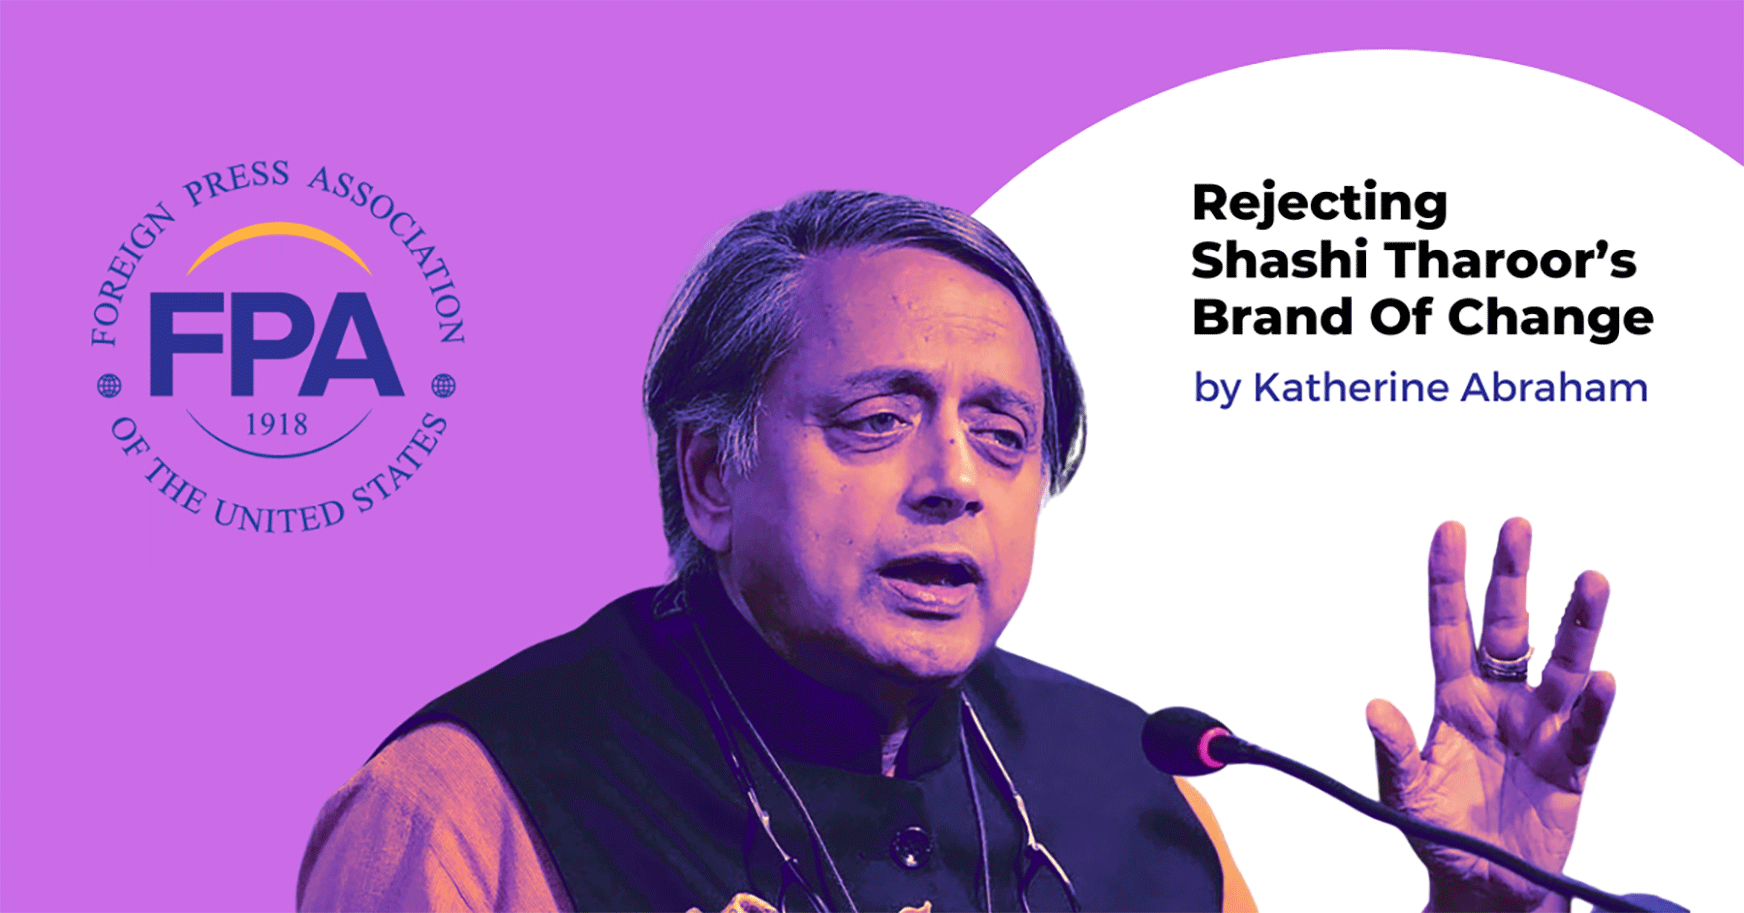 Rejecting Shashi Tharoor’s Brand Of Change